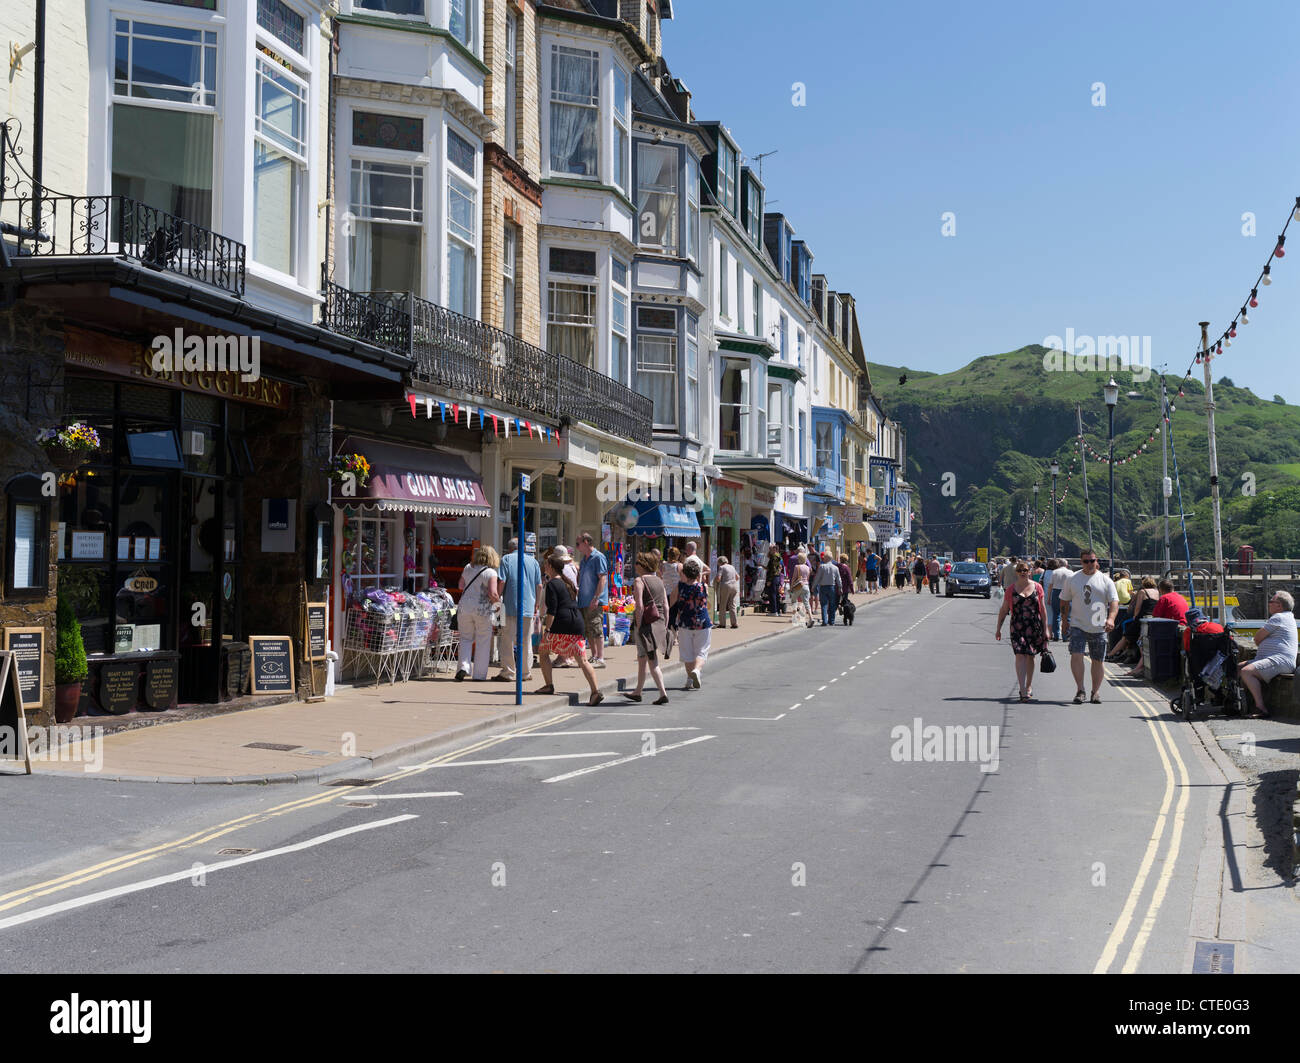 dh Harbour seafront road ILFRACOMBE DEVON Traditional seaside town people tourists and shops uk britain Stock Photo